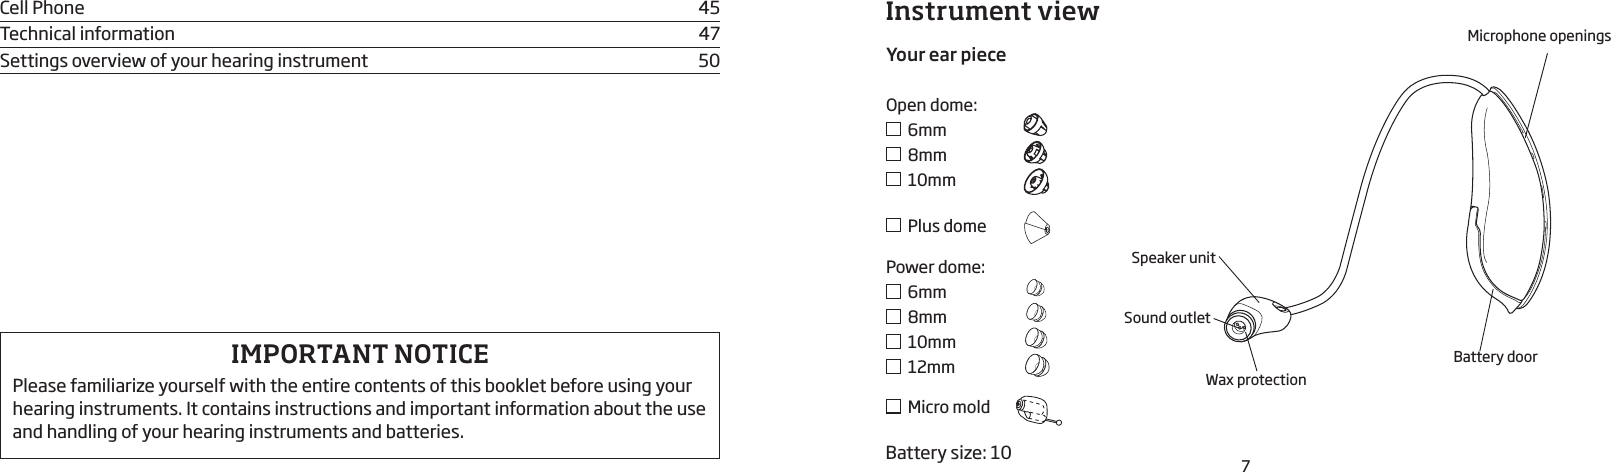 7Instrument viewIMPORTANT NOTICEPlease familiarize yourself with the entire contents of this booklet before using your hearing instru ments. It contains instructions and important informa tion about the use and handling of your hearing instru ments and batteries.Cell Phone  45Technical information  47Settings overview of your hearing instrument  50Speaker unit Sound outletWax protectionMicrophone openingsBattery doorBattery size: 10Your ear pieceOpen dome:  6mm  8mm  10mm  Plus domePower dome:  6mm  8mm  10mm  12mm  Micro mold